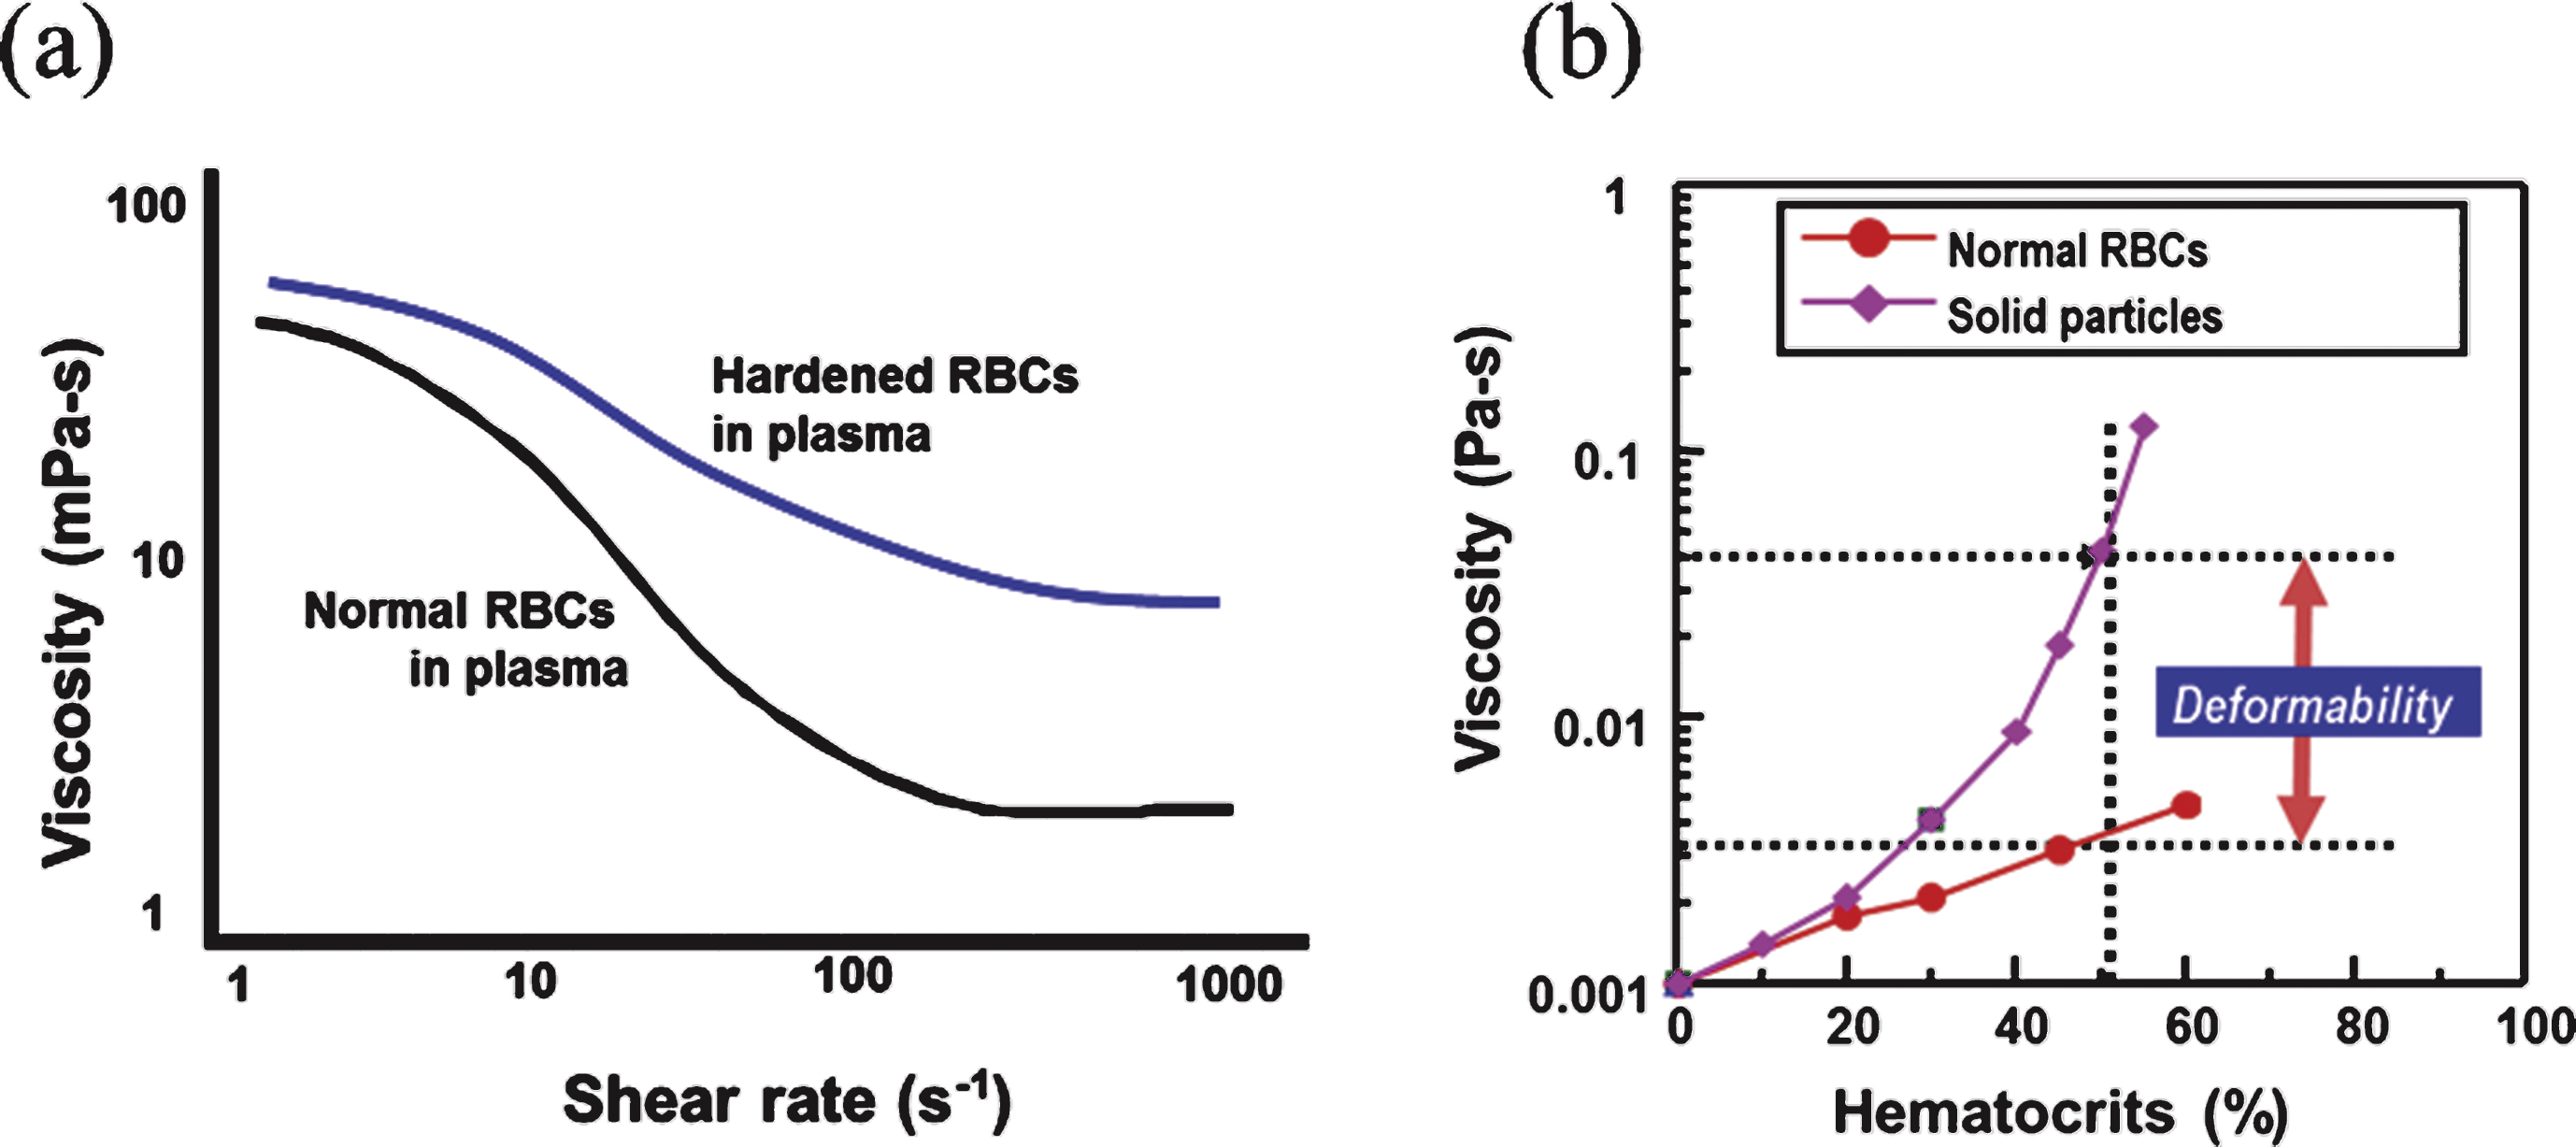 (a) Comparison of blood viscosity when normal or hardened red blood cells are suspended in plasma. (b) Effect of deformability on high-shear viscosity with various levels of hematocrit.